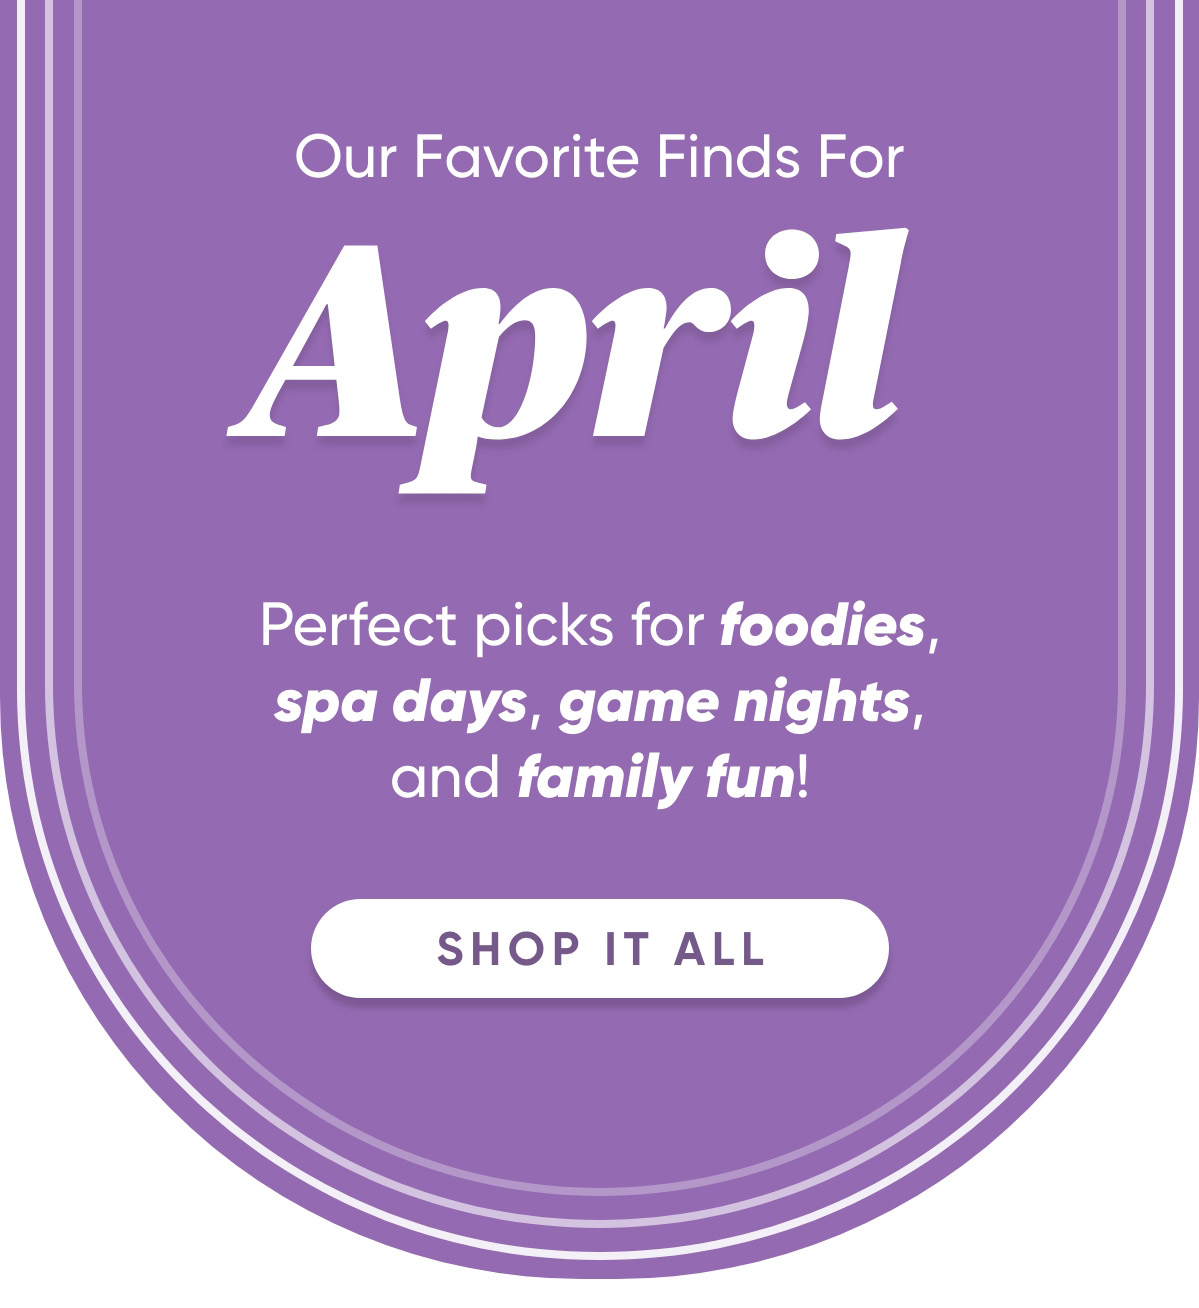 Our Favorite Finds For April!  Perfect picks for foodies, spa days, game nights, and family fun!  Shop it all: